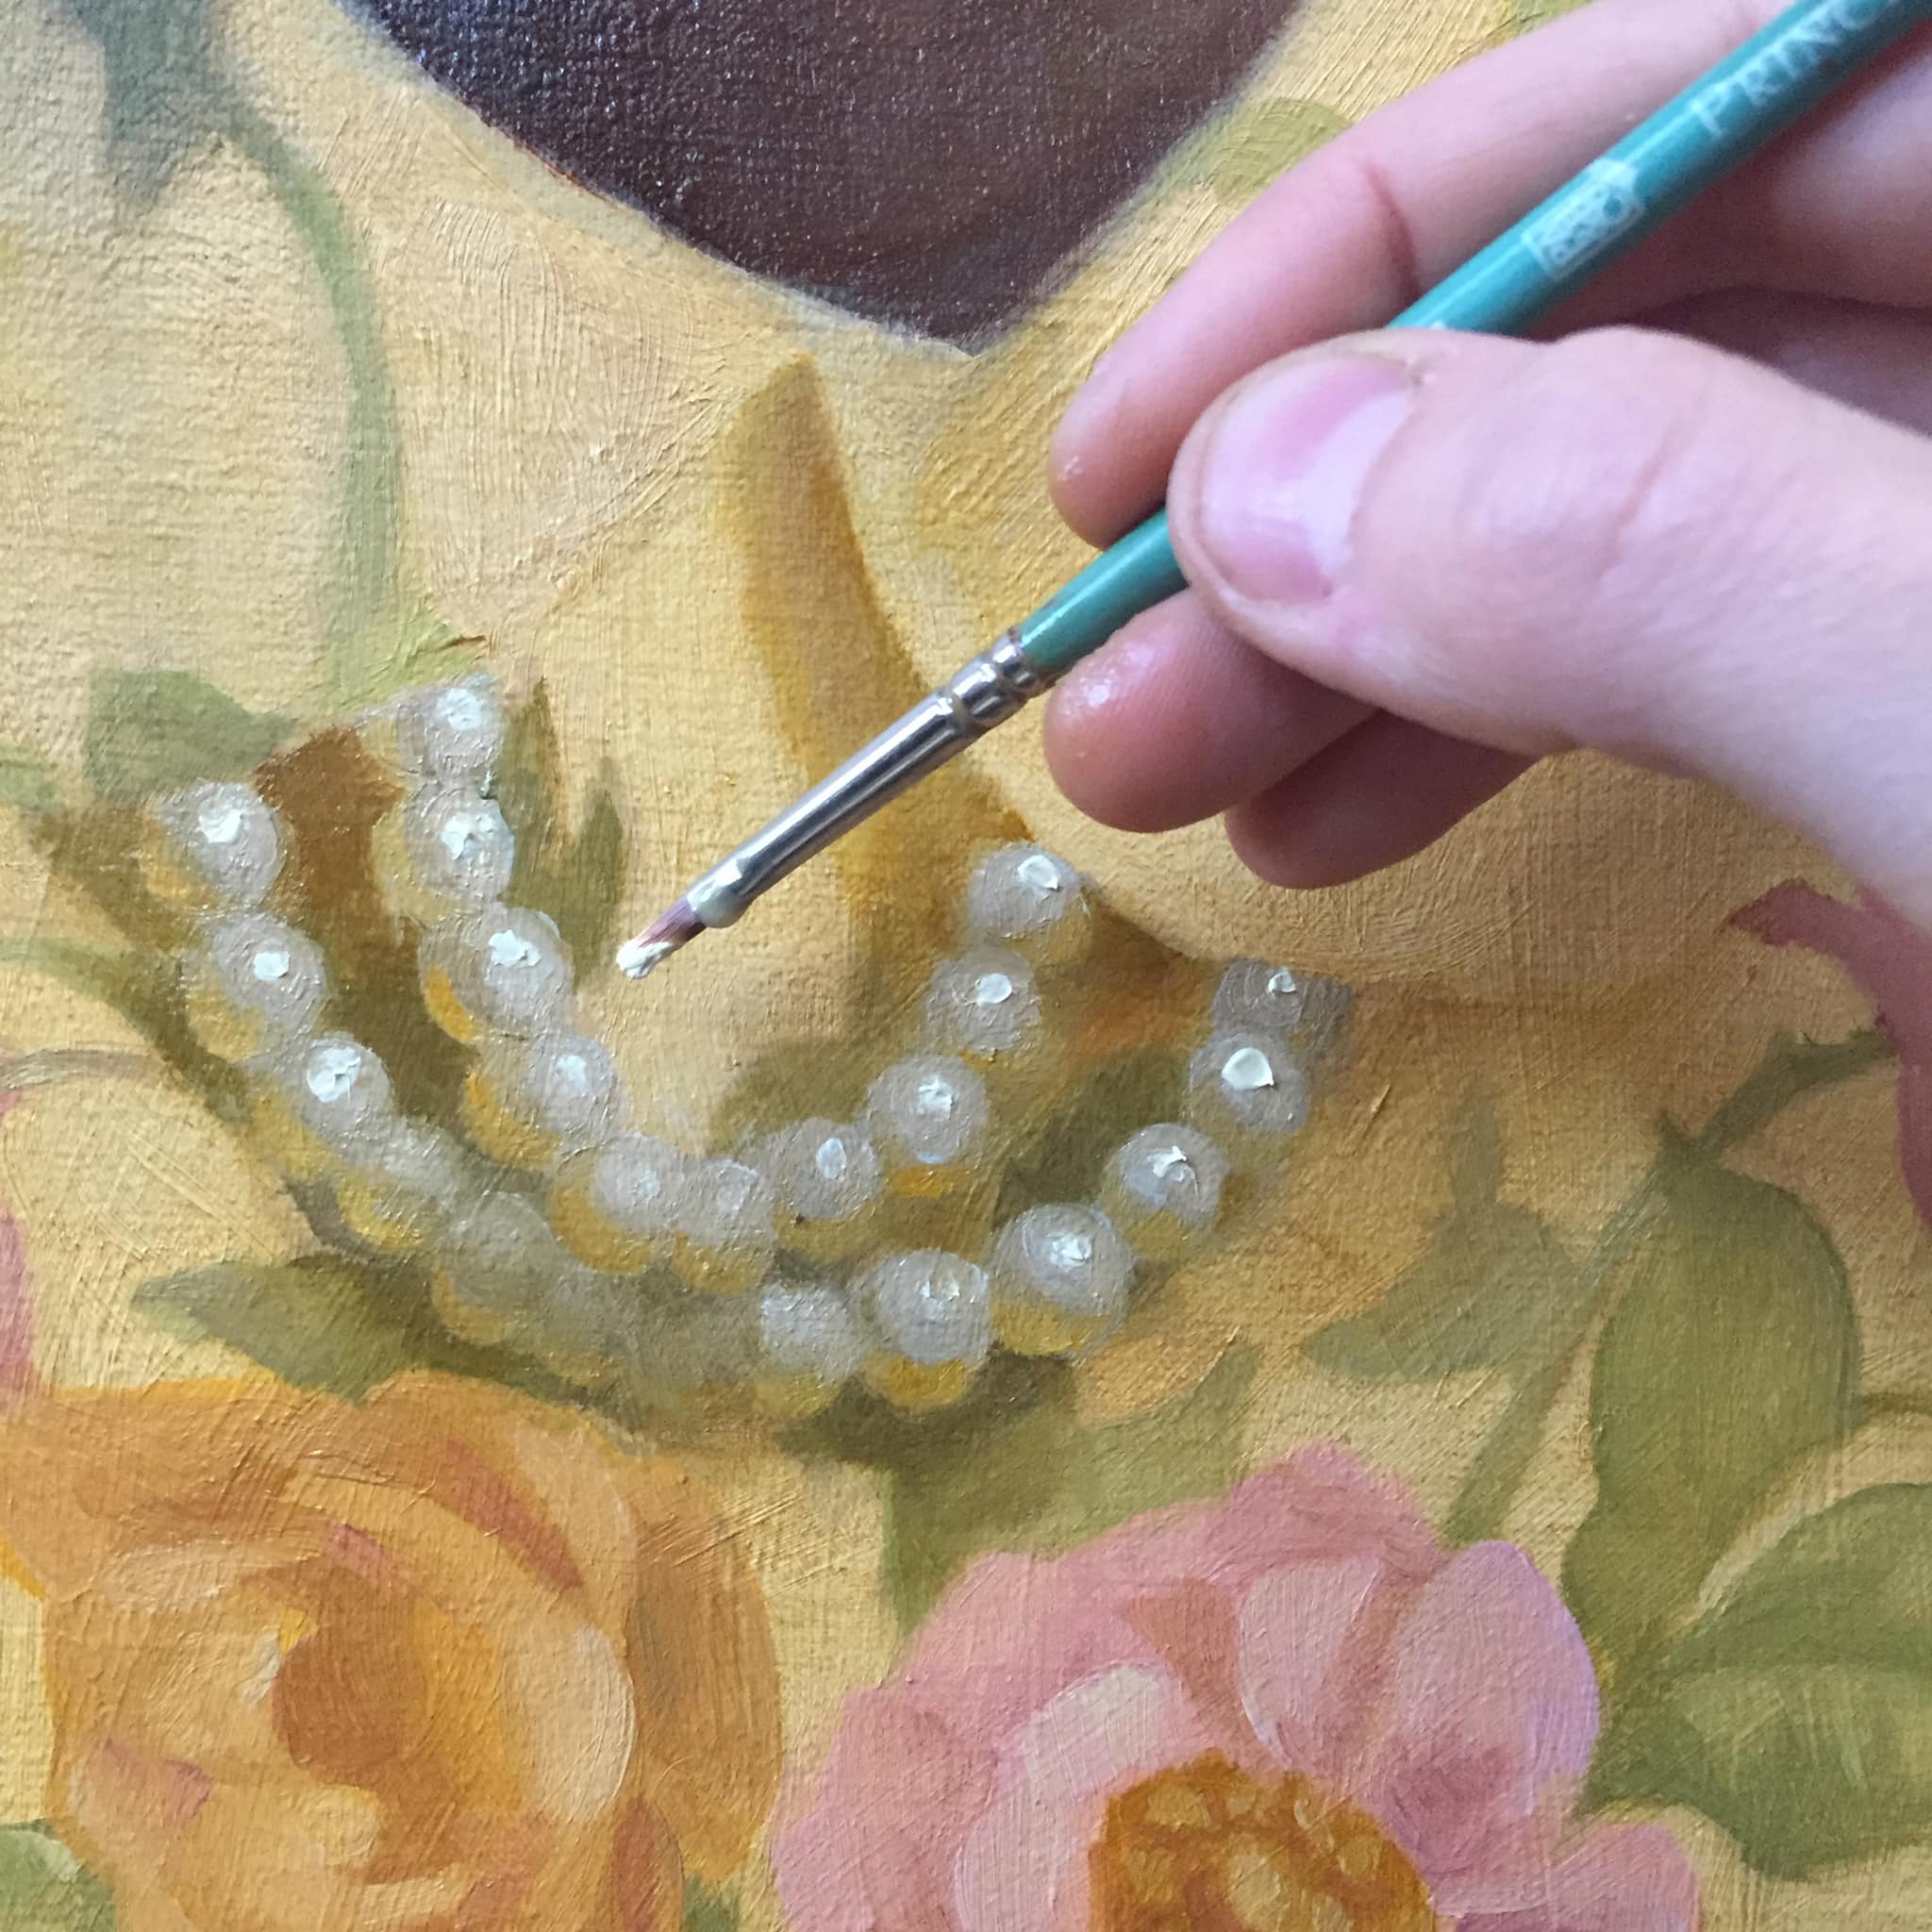 Painting realistic pearls